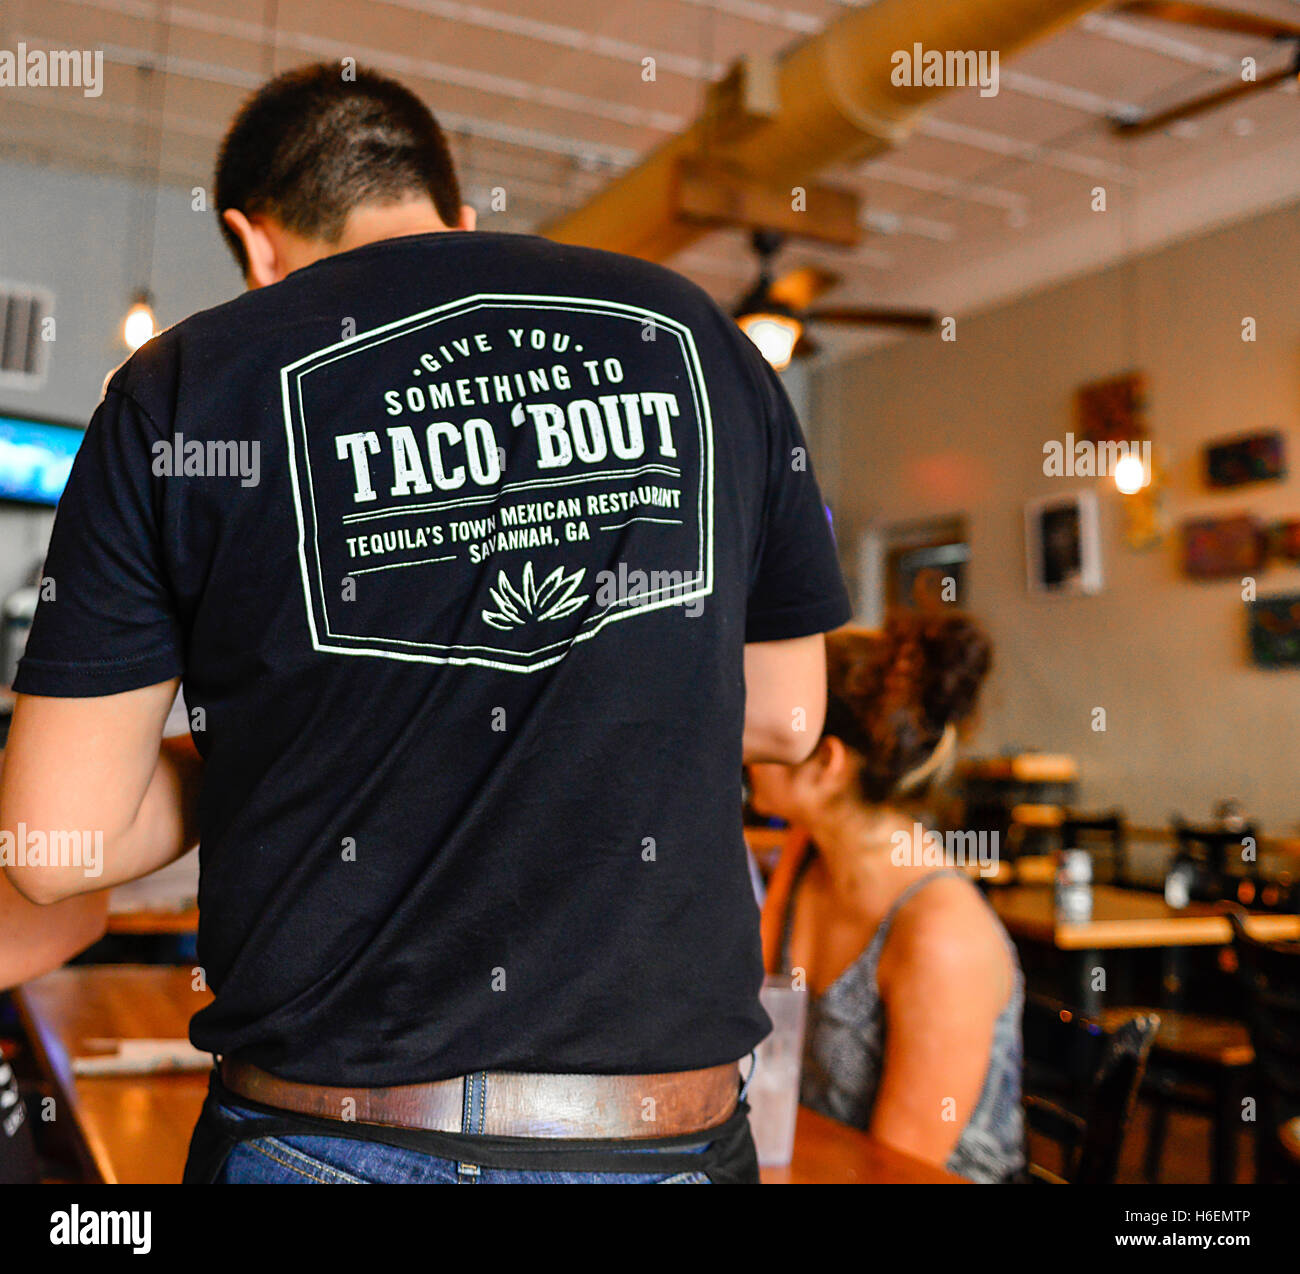 Waiter's tee shirt branding Slogan reads 'Give you something to Taco 'bout' Tequila's Town Mexican Restaurant in Savannah, GA Stock Photo